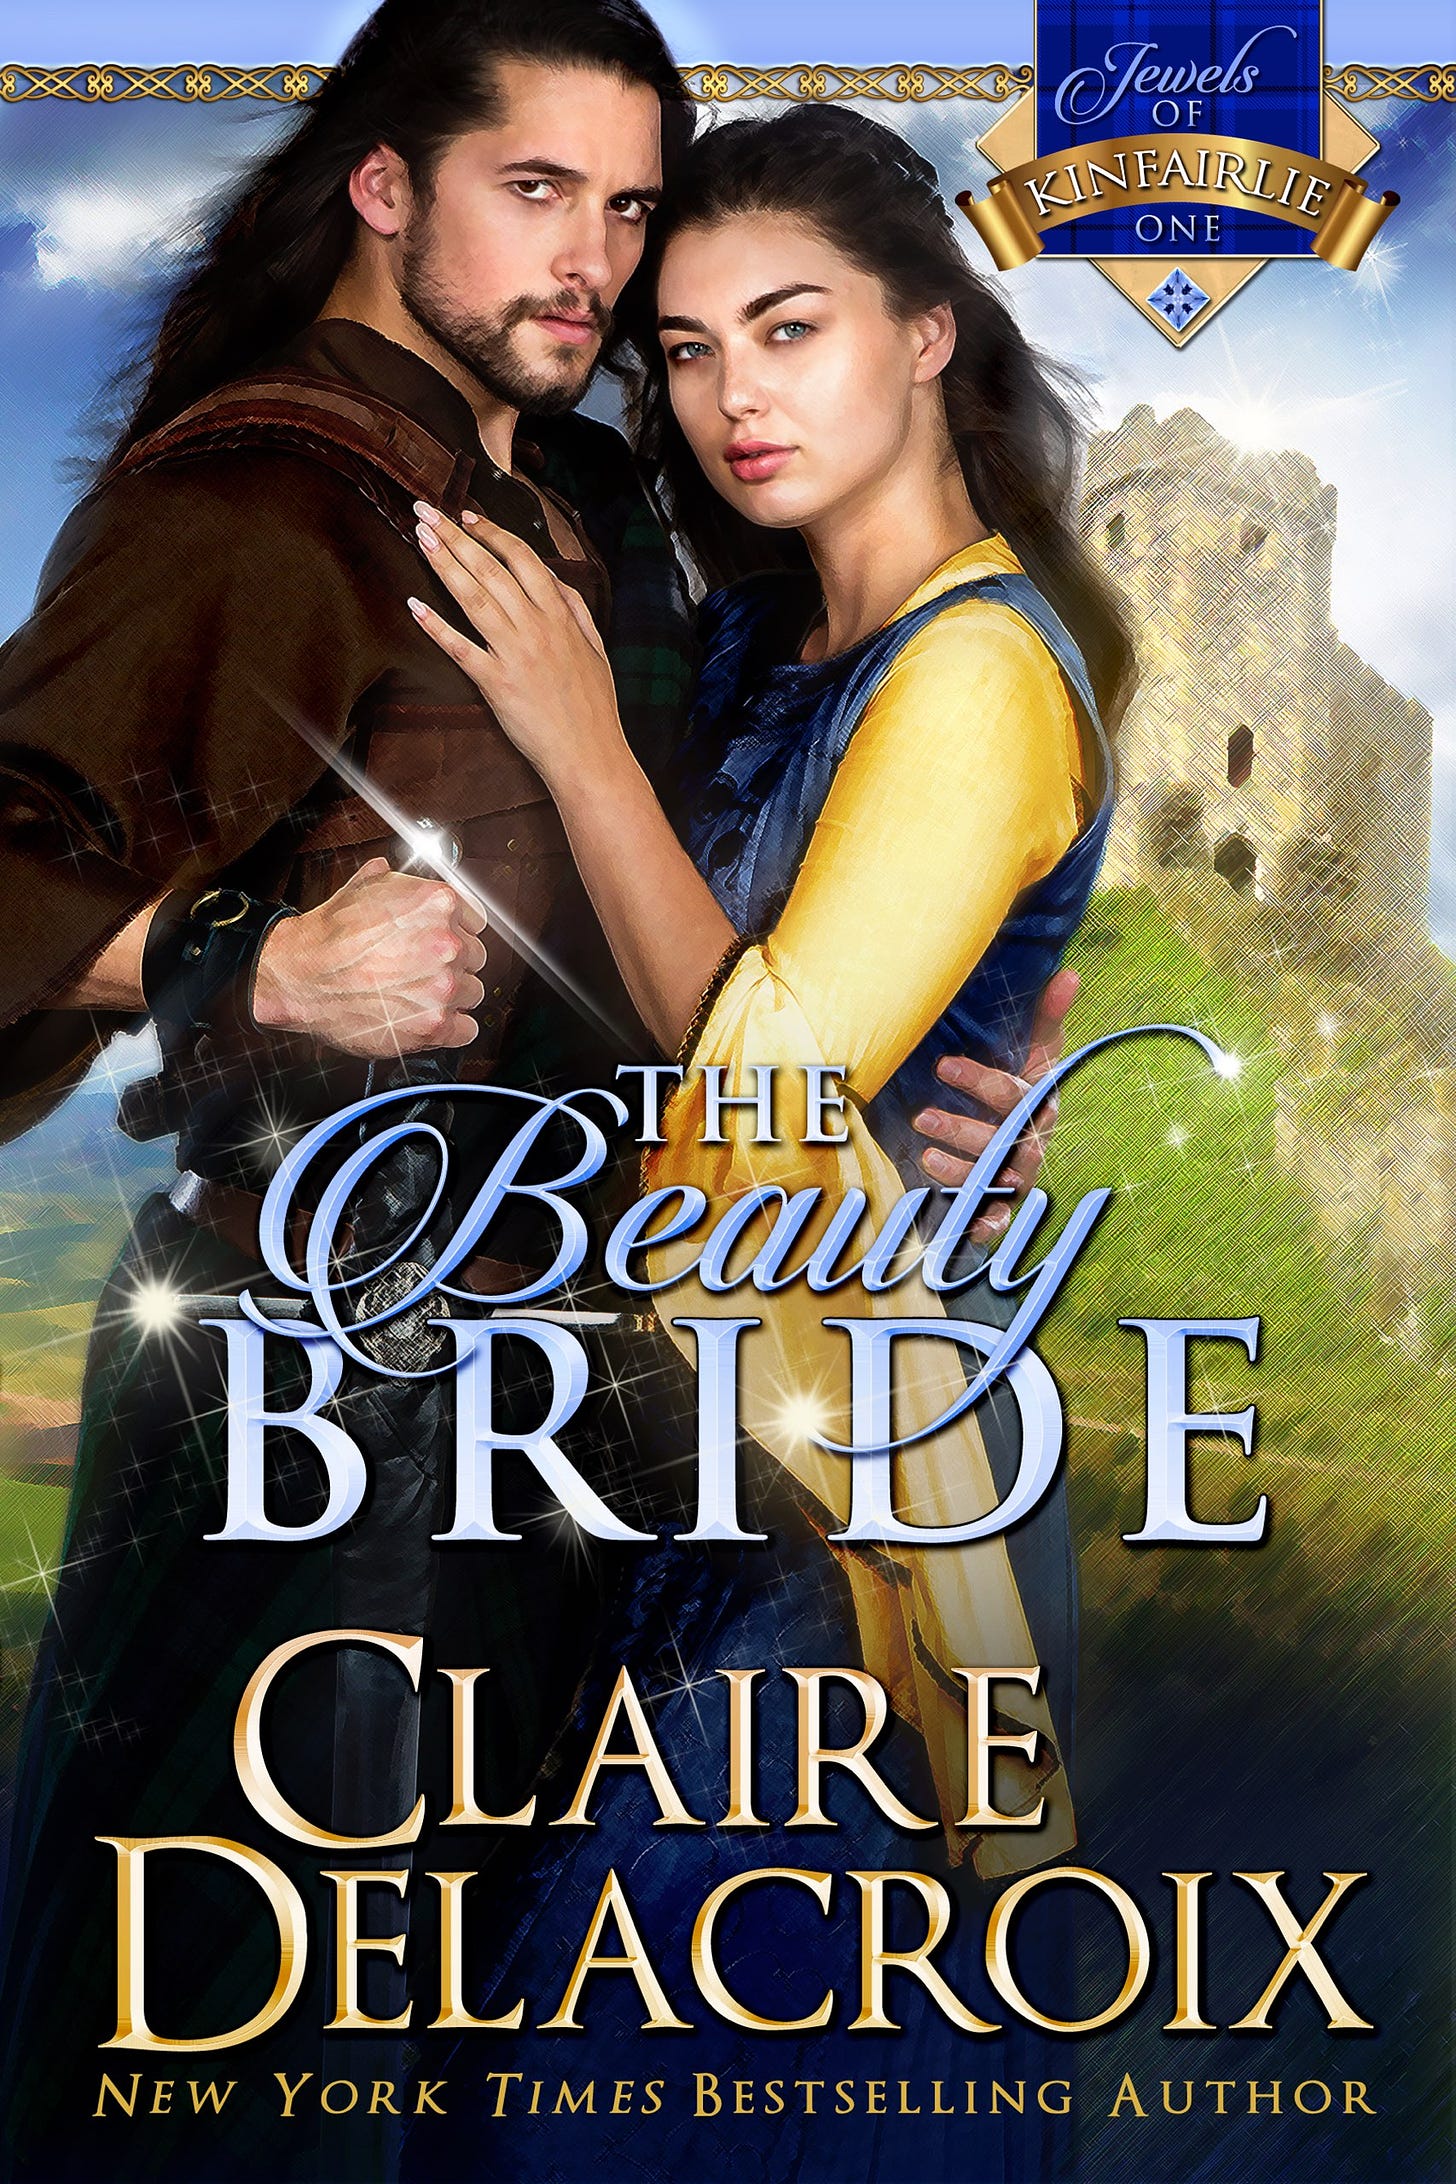 The Beauty Bride, book one of the Jewels of Kinfairlie by Claire Delacroix